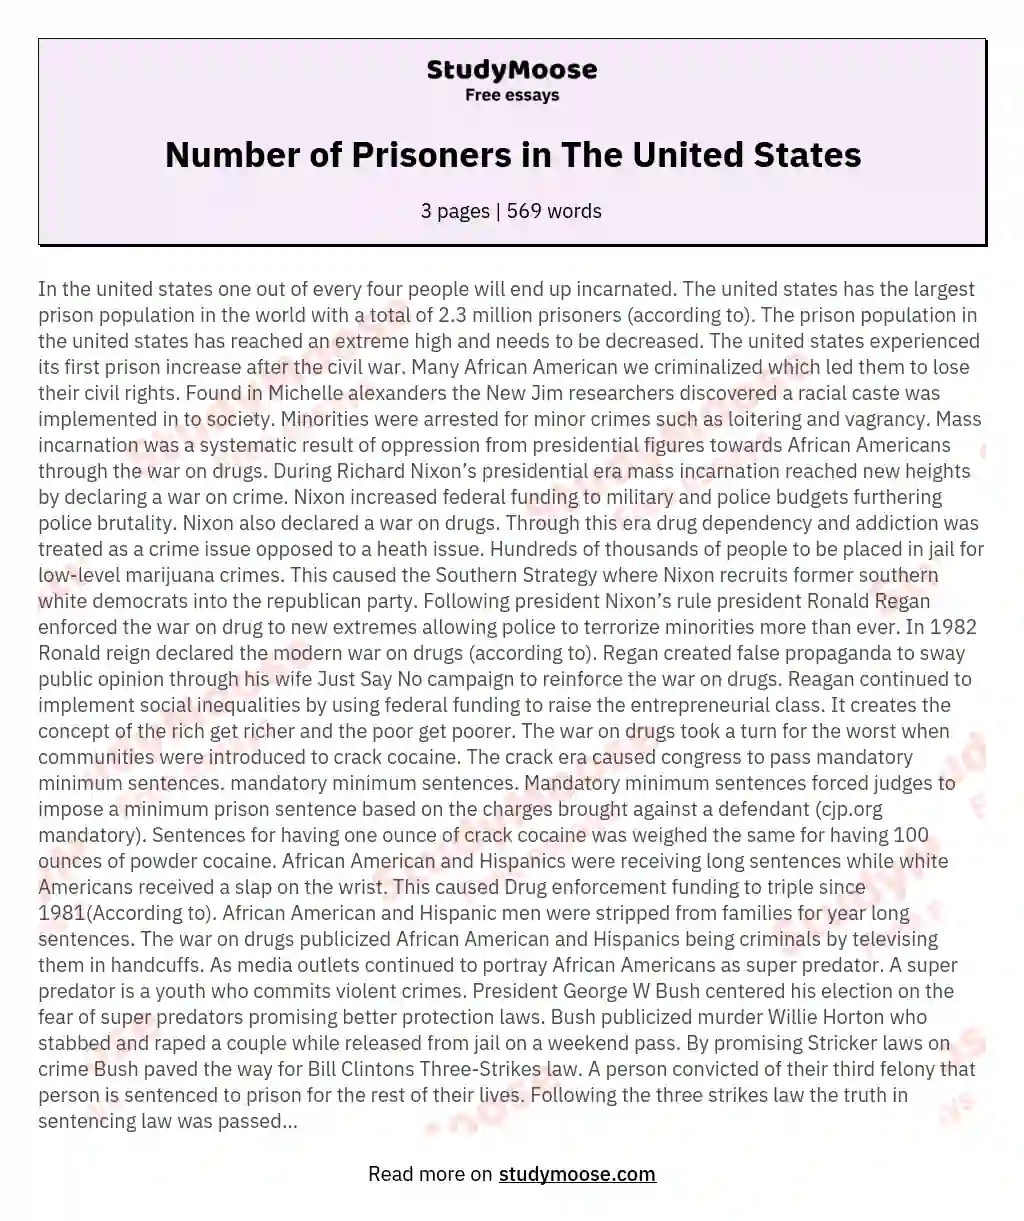 Number of Prisoners in The United States essay